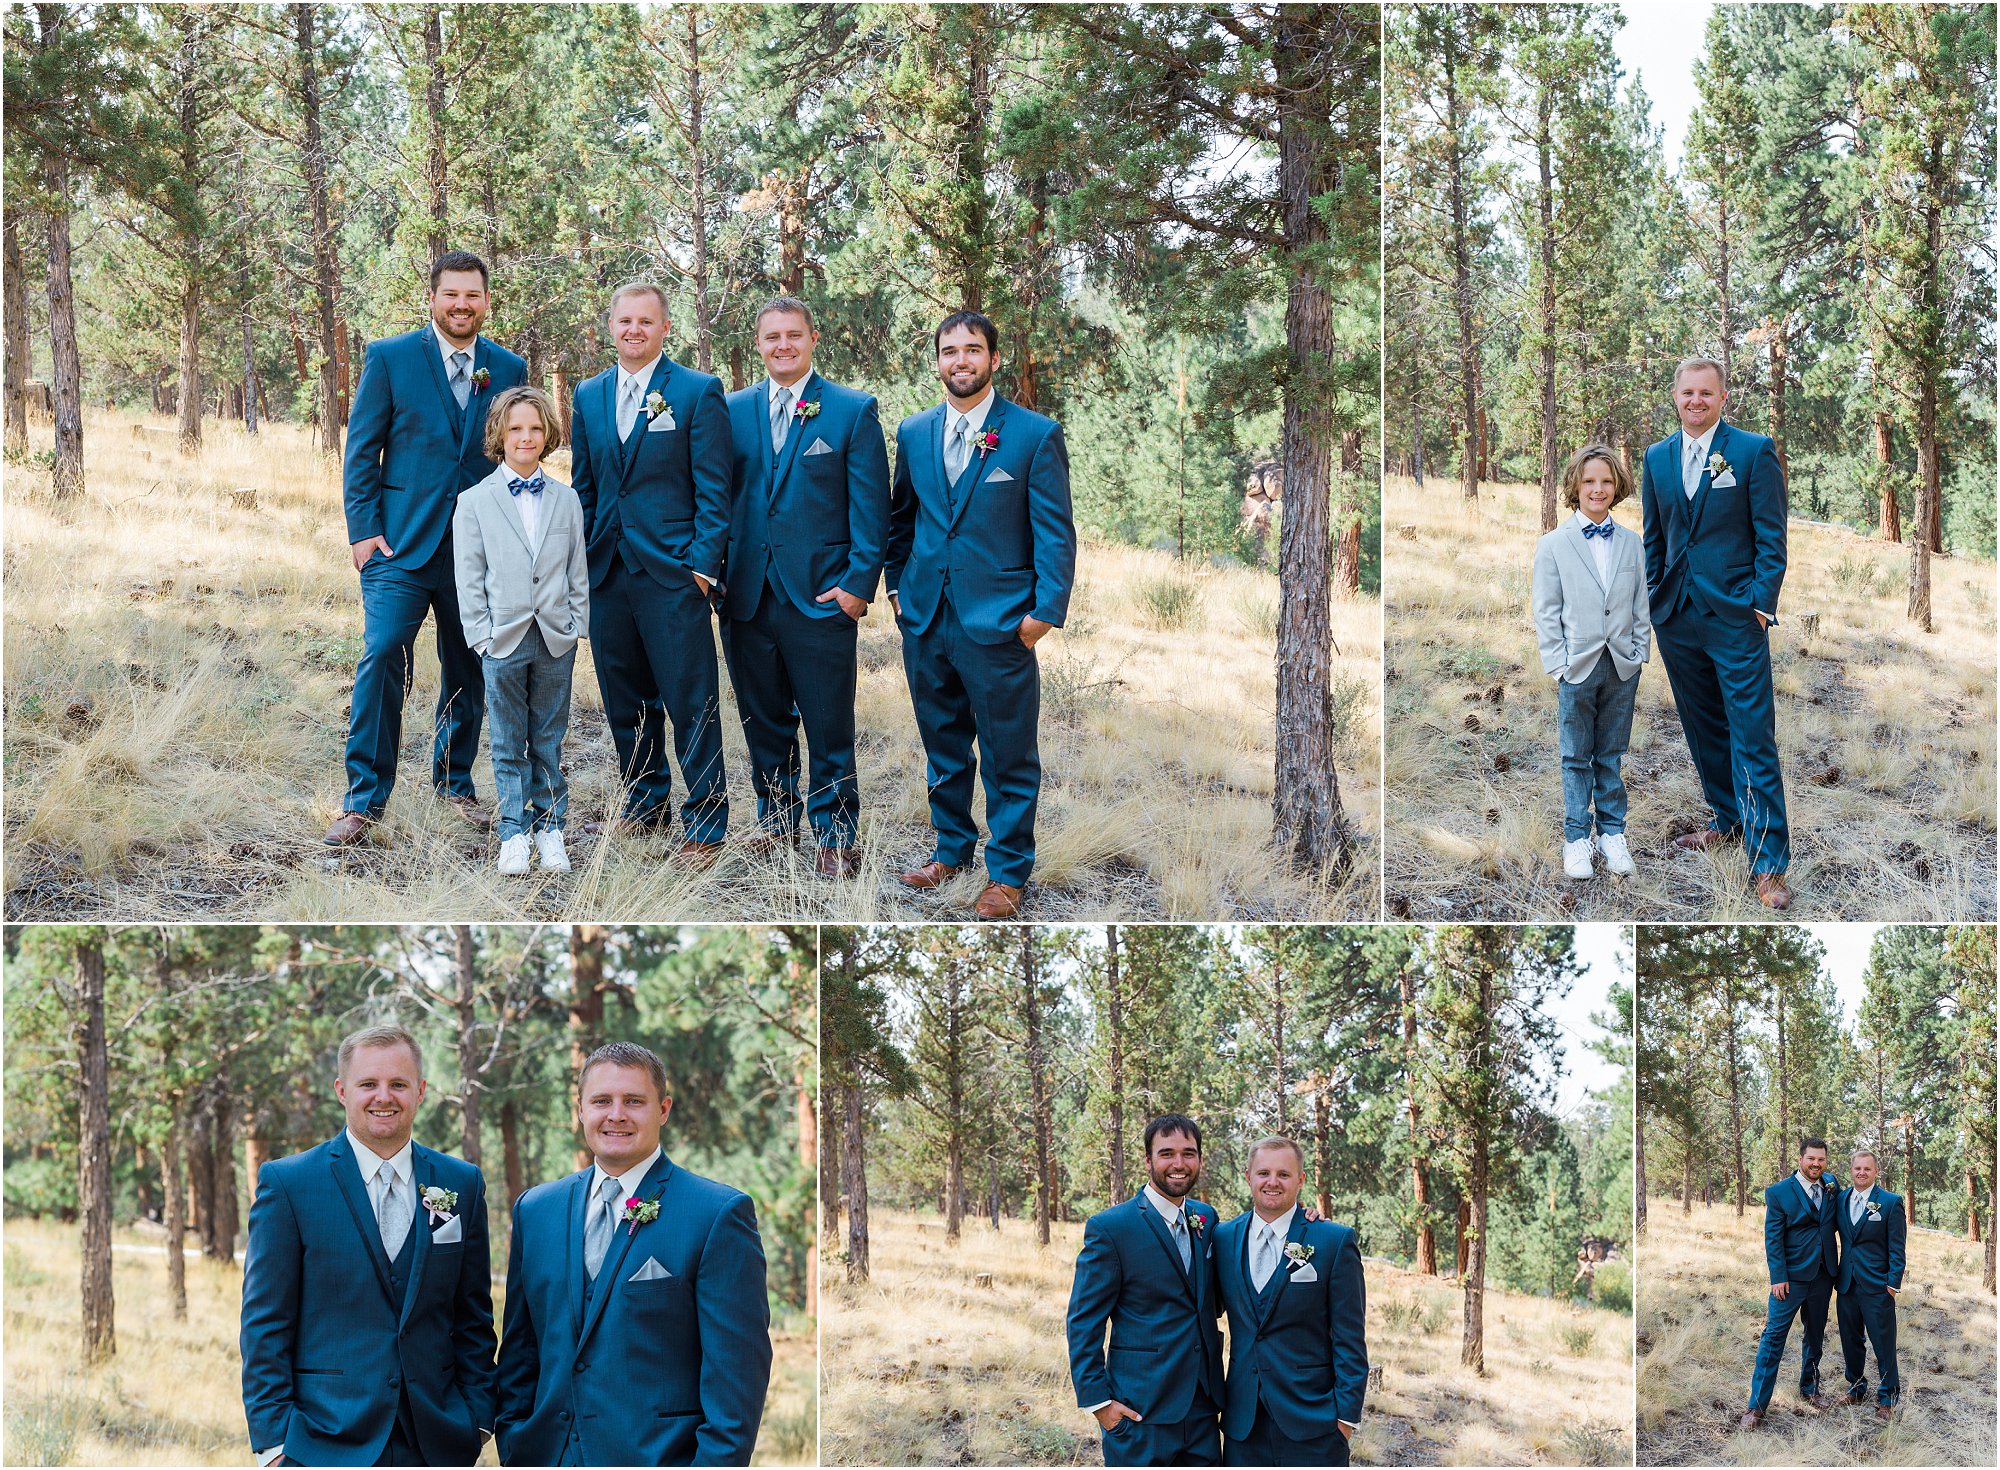 A dapper looking group of groomsmen along with the groom and ringbearer at this Rock Springs Ranch wedding captured by Bend wedding photographer Erica Swantek Photography. 